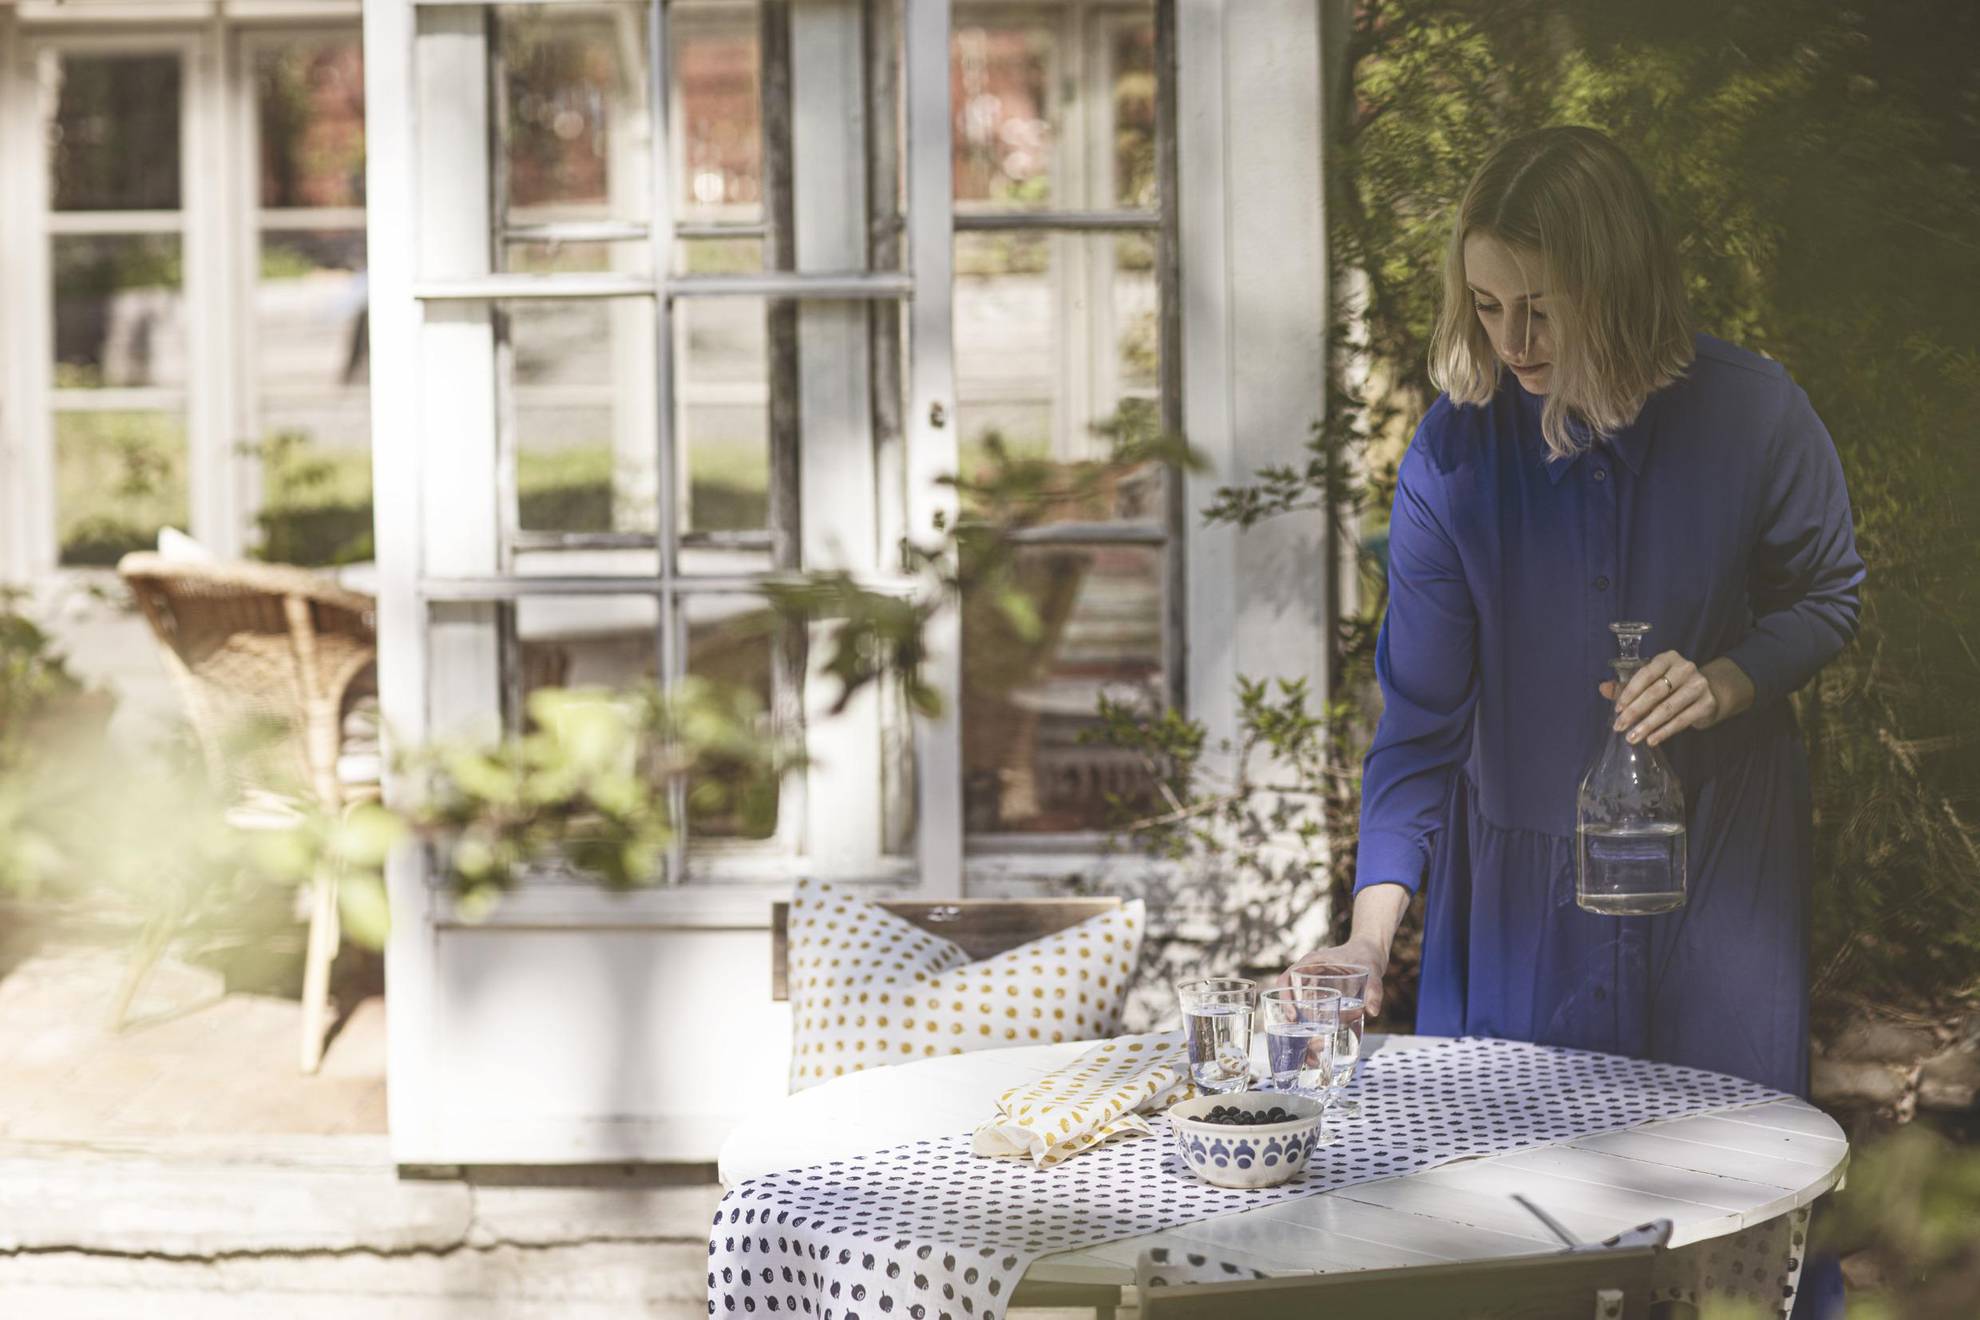 A woman puts glass of water on a table that is set with a table cloth and a bowl of blueberries. In the background you see the doors to a house and there is a branch blurry in the front.